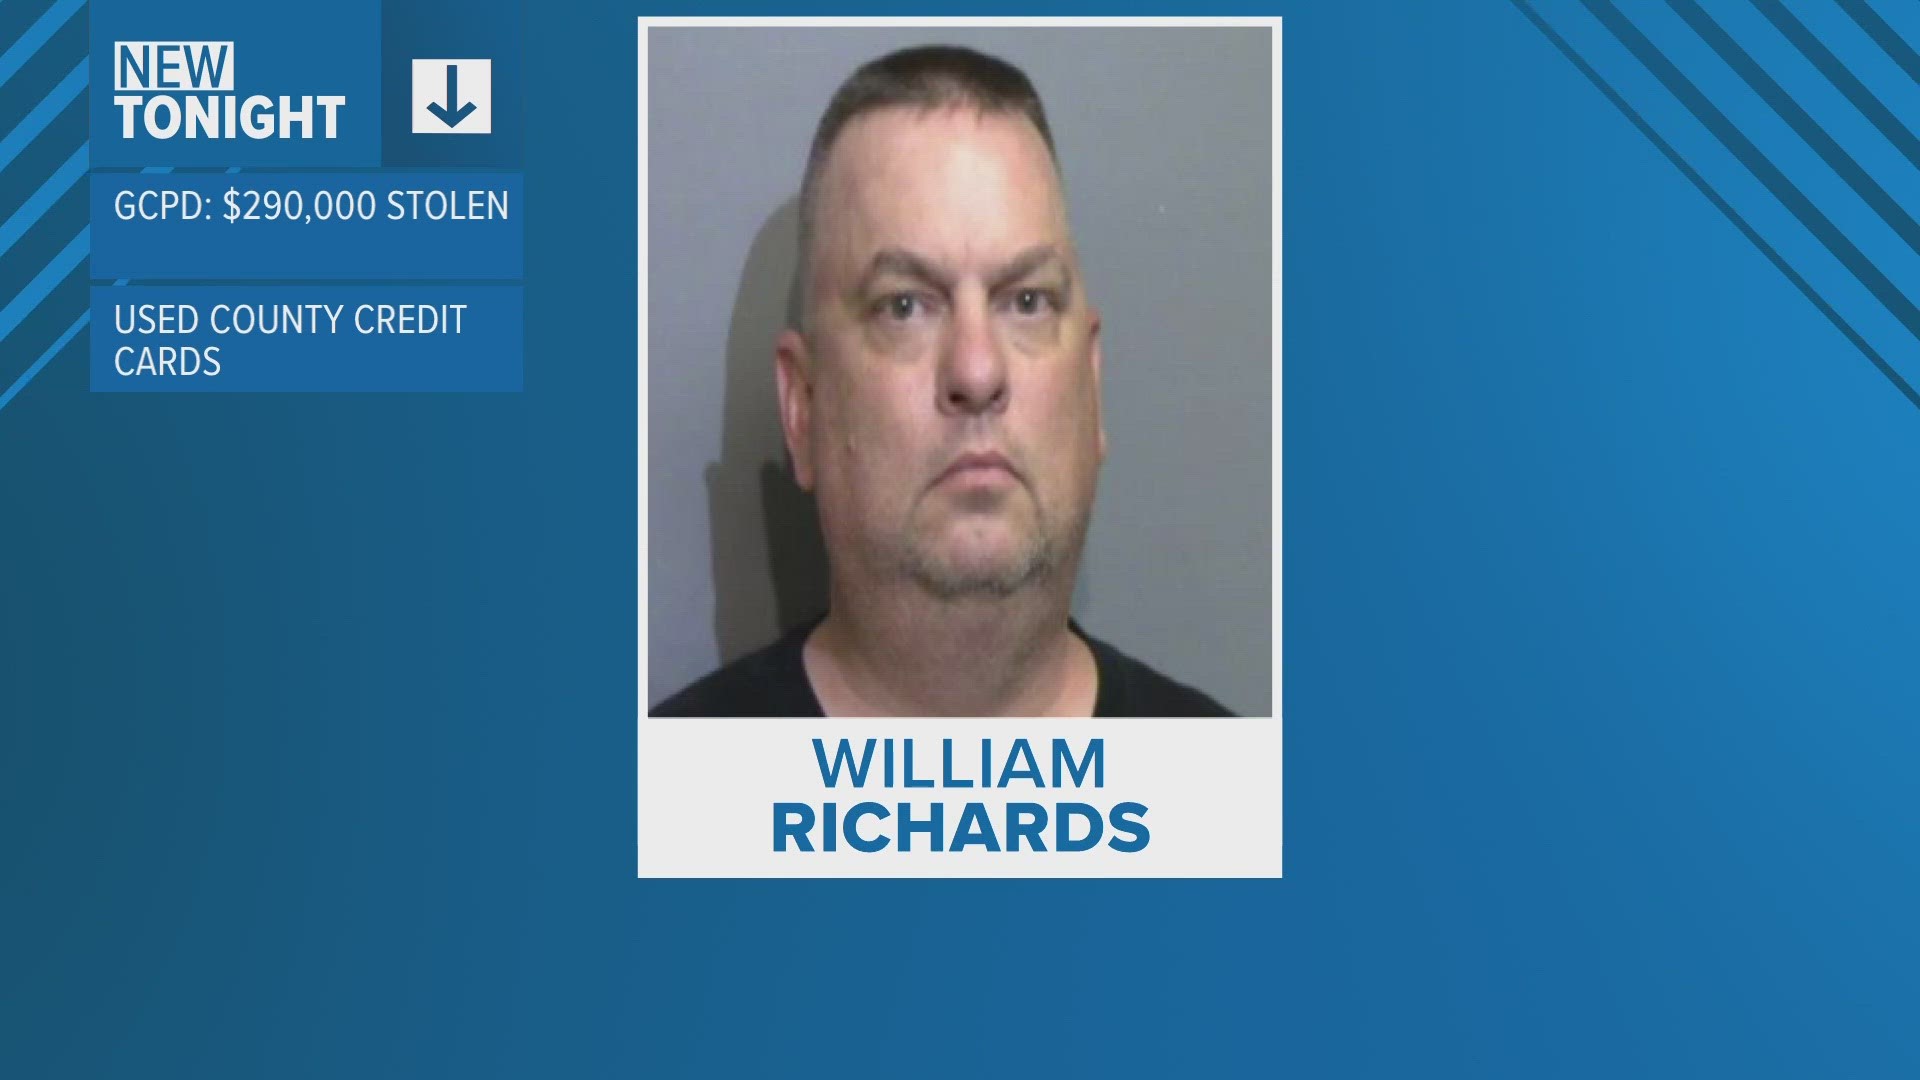 The Glynn County Police Department arrested 50-year-old William Richards for making 'suspicious transactions' using county employee credit cards.